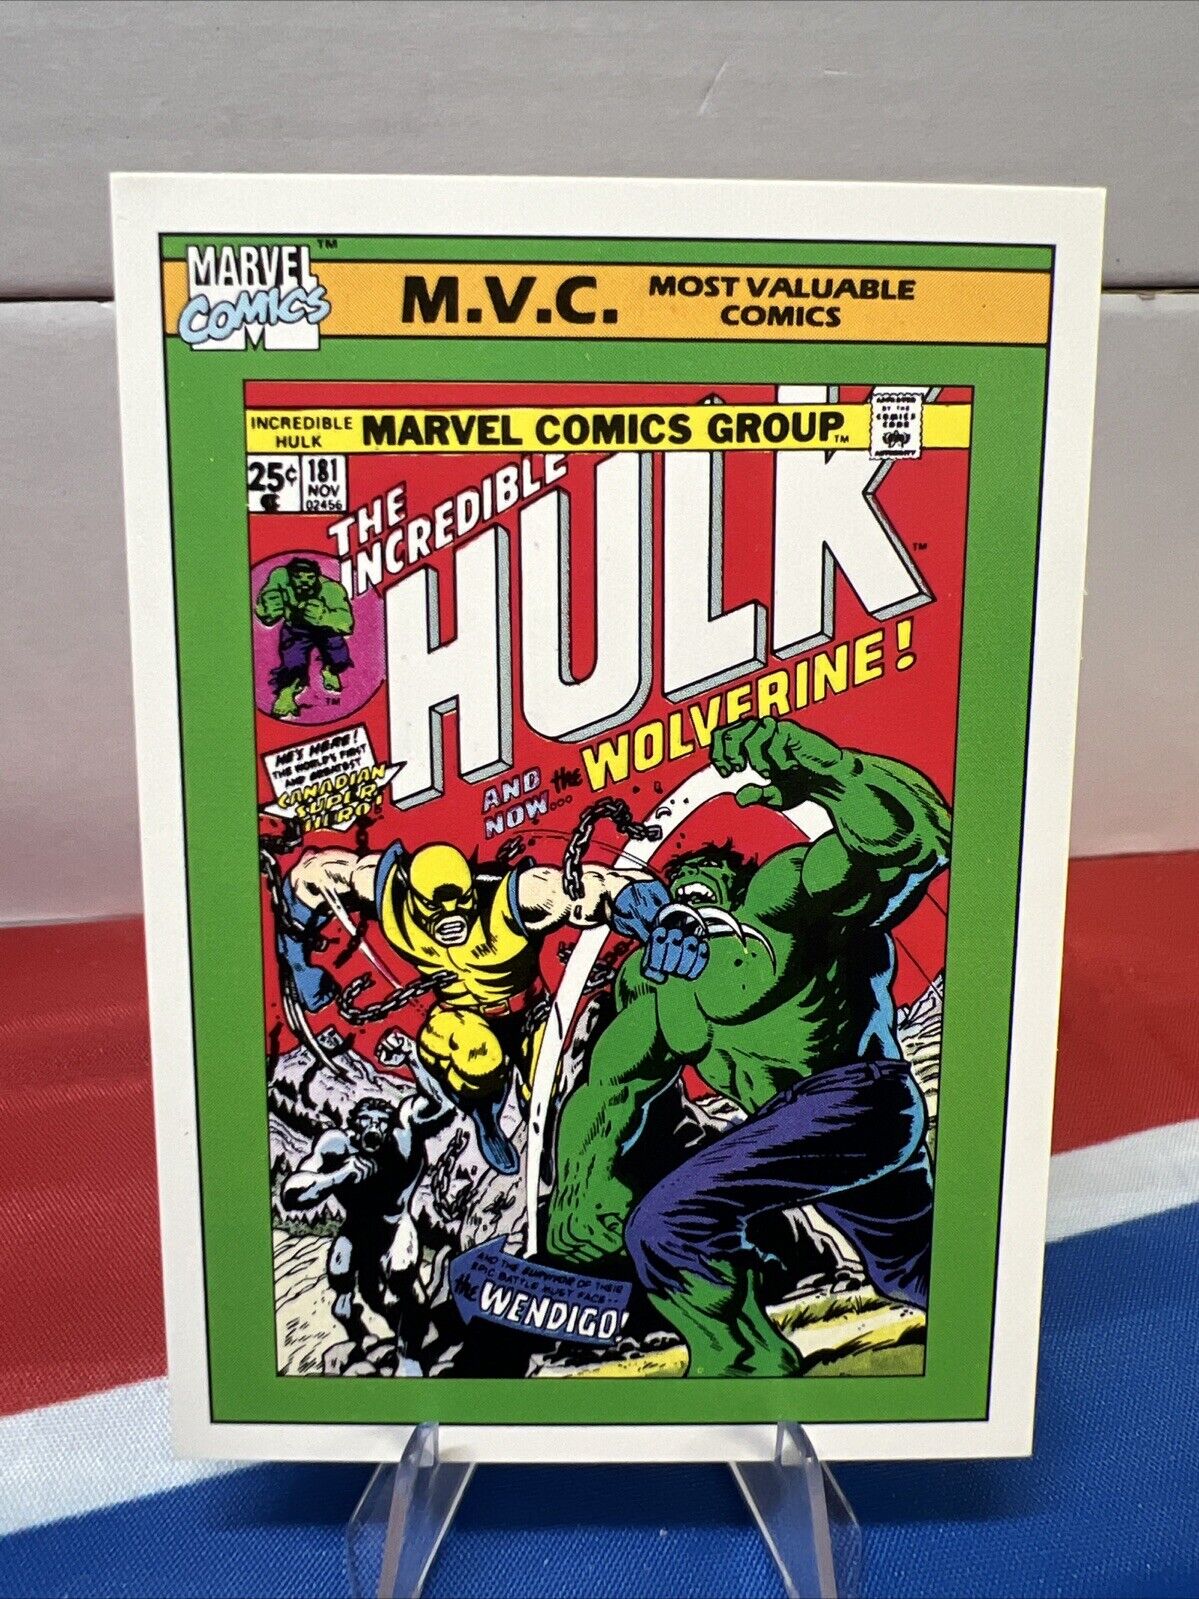 1990 Impel Marvel The Incredible Hulk #181 Most Valuable Comics Card #134